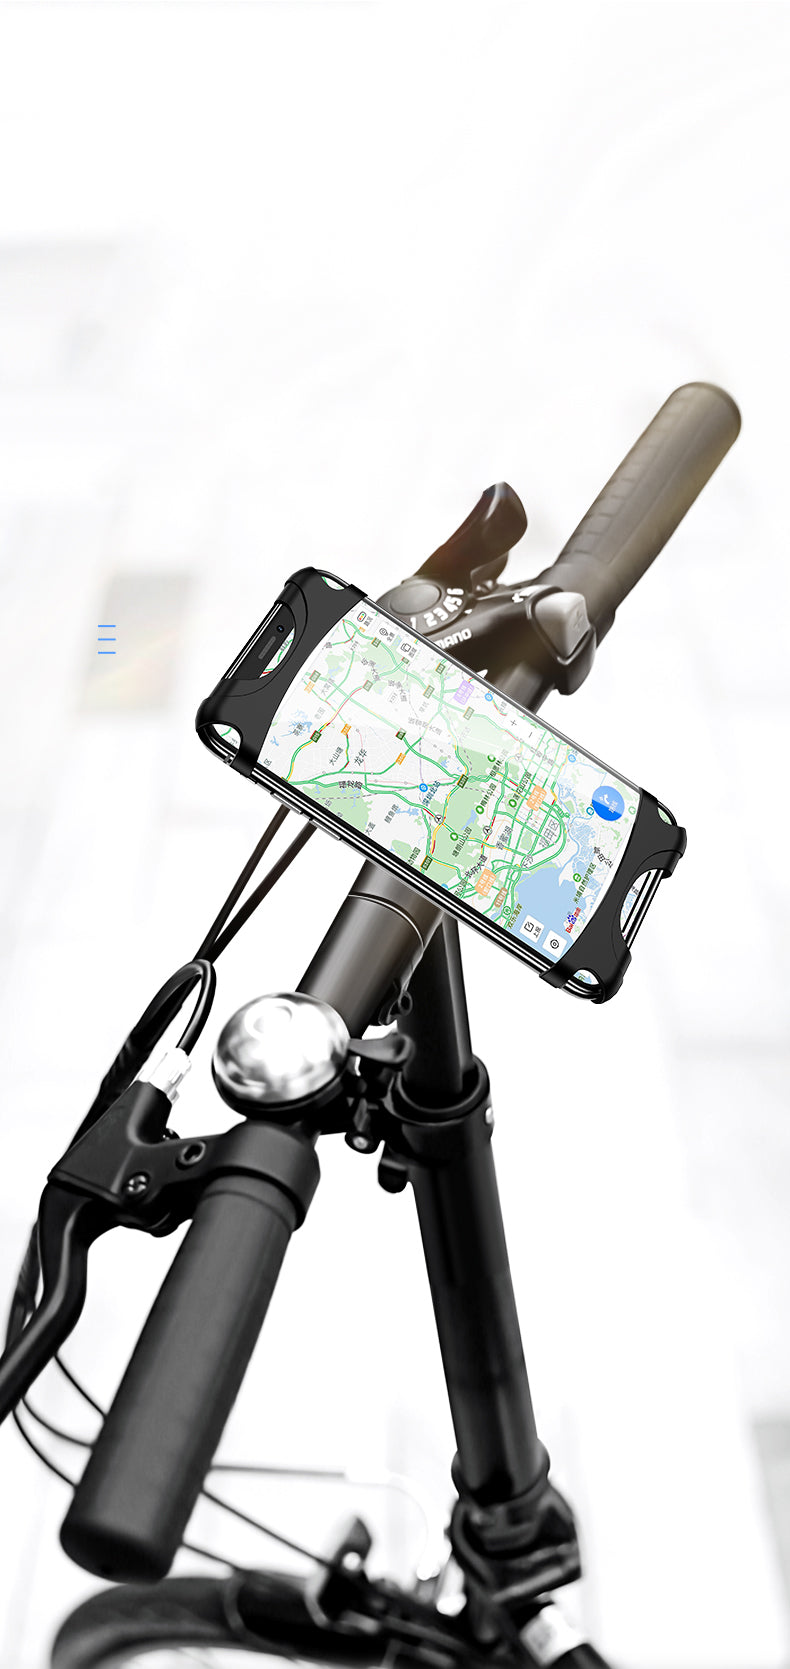 USAMS US-ZJ053 Bicycle Silicone Support Stand Mobile Phone Bracket